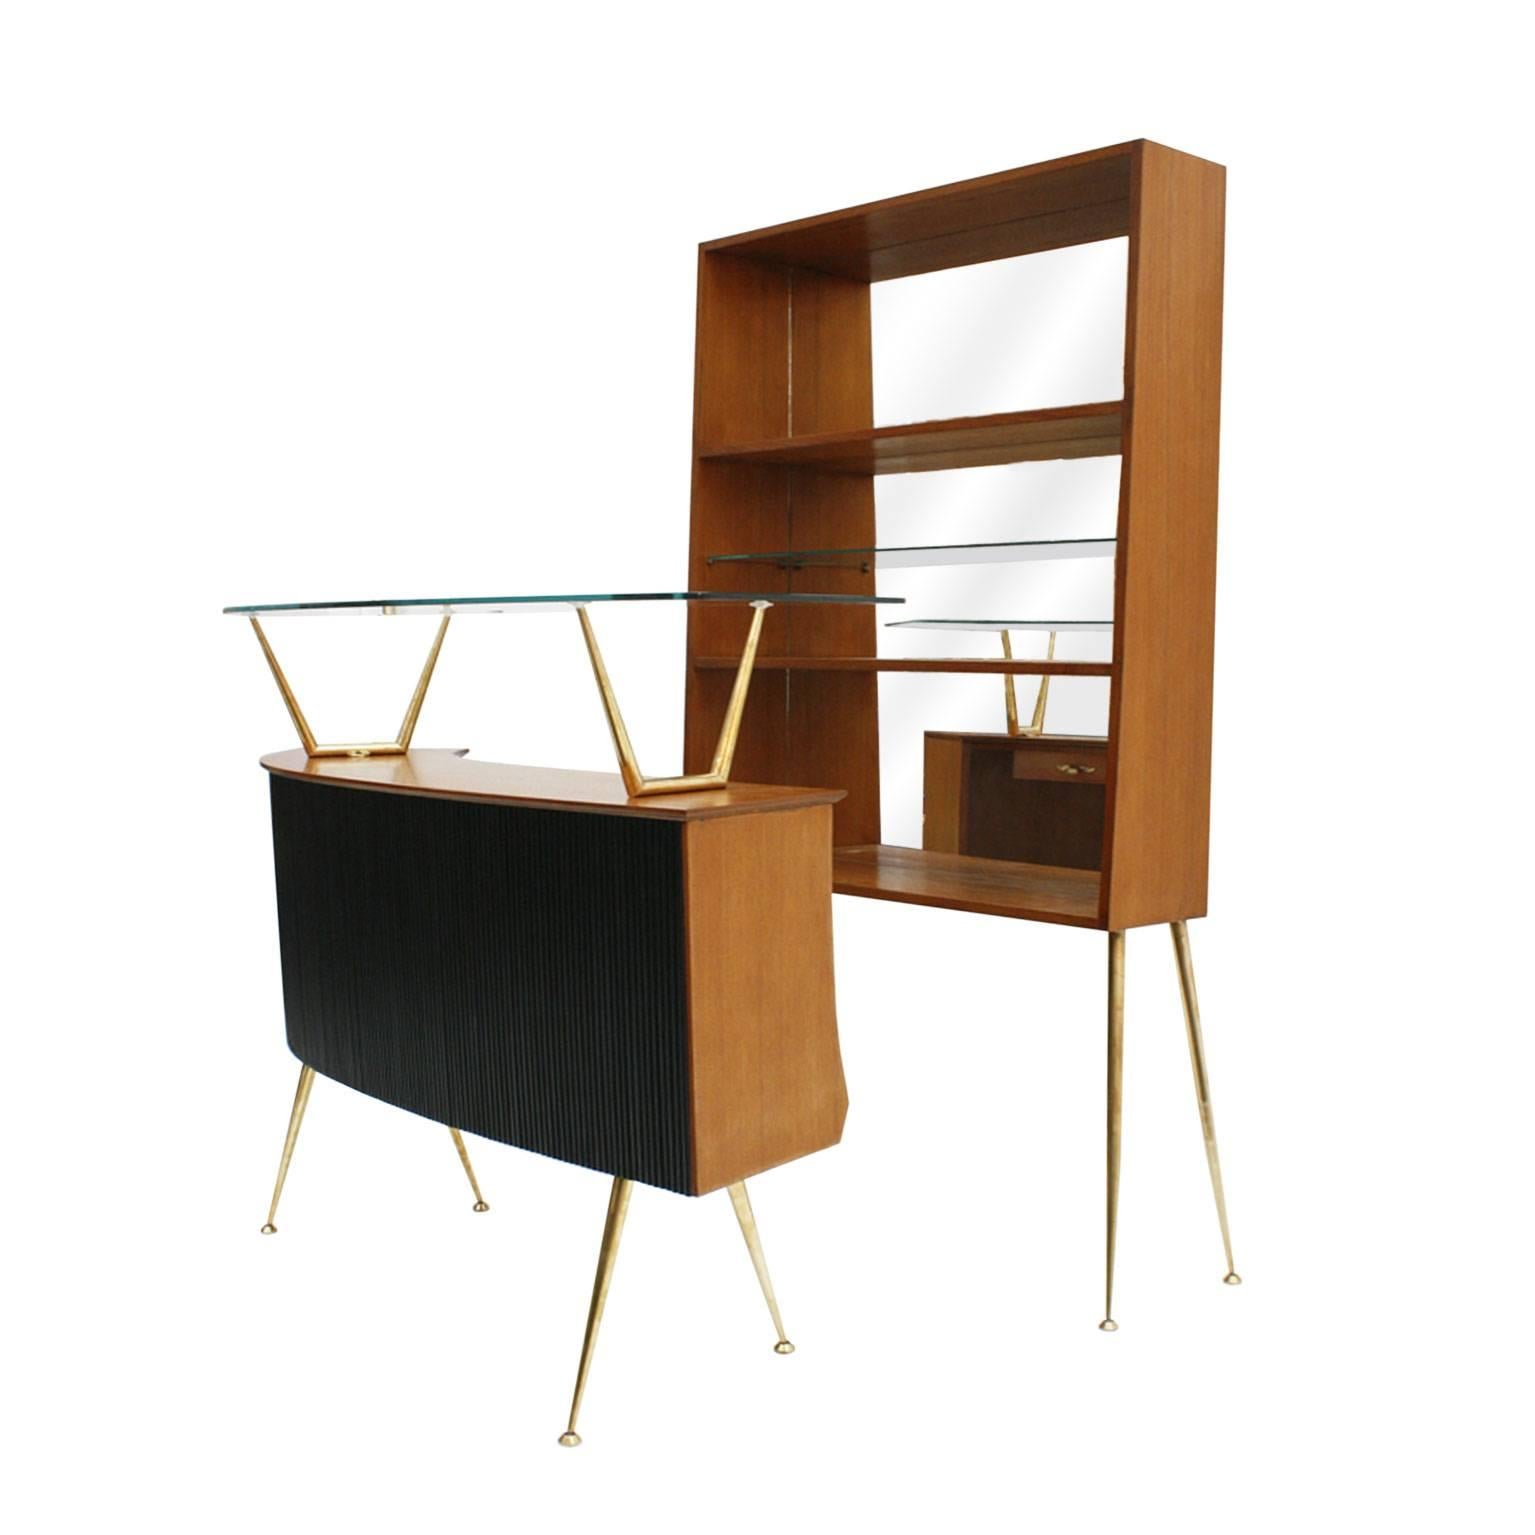 Dry bar composed by bar and shelve made up of solid wood. Solid wood structure with front panelling, feet and details made of brass. Shelf made of wooden shelves and transparent glass and interior covered in mirror glass. Bar with compartmentalized